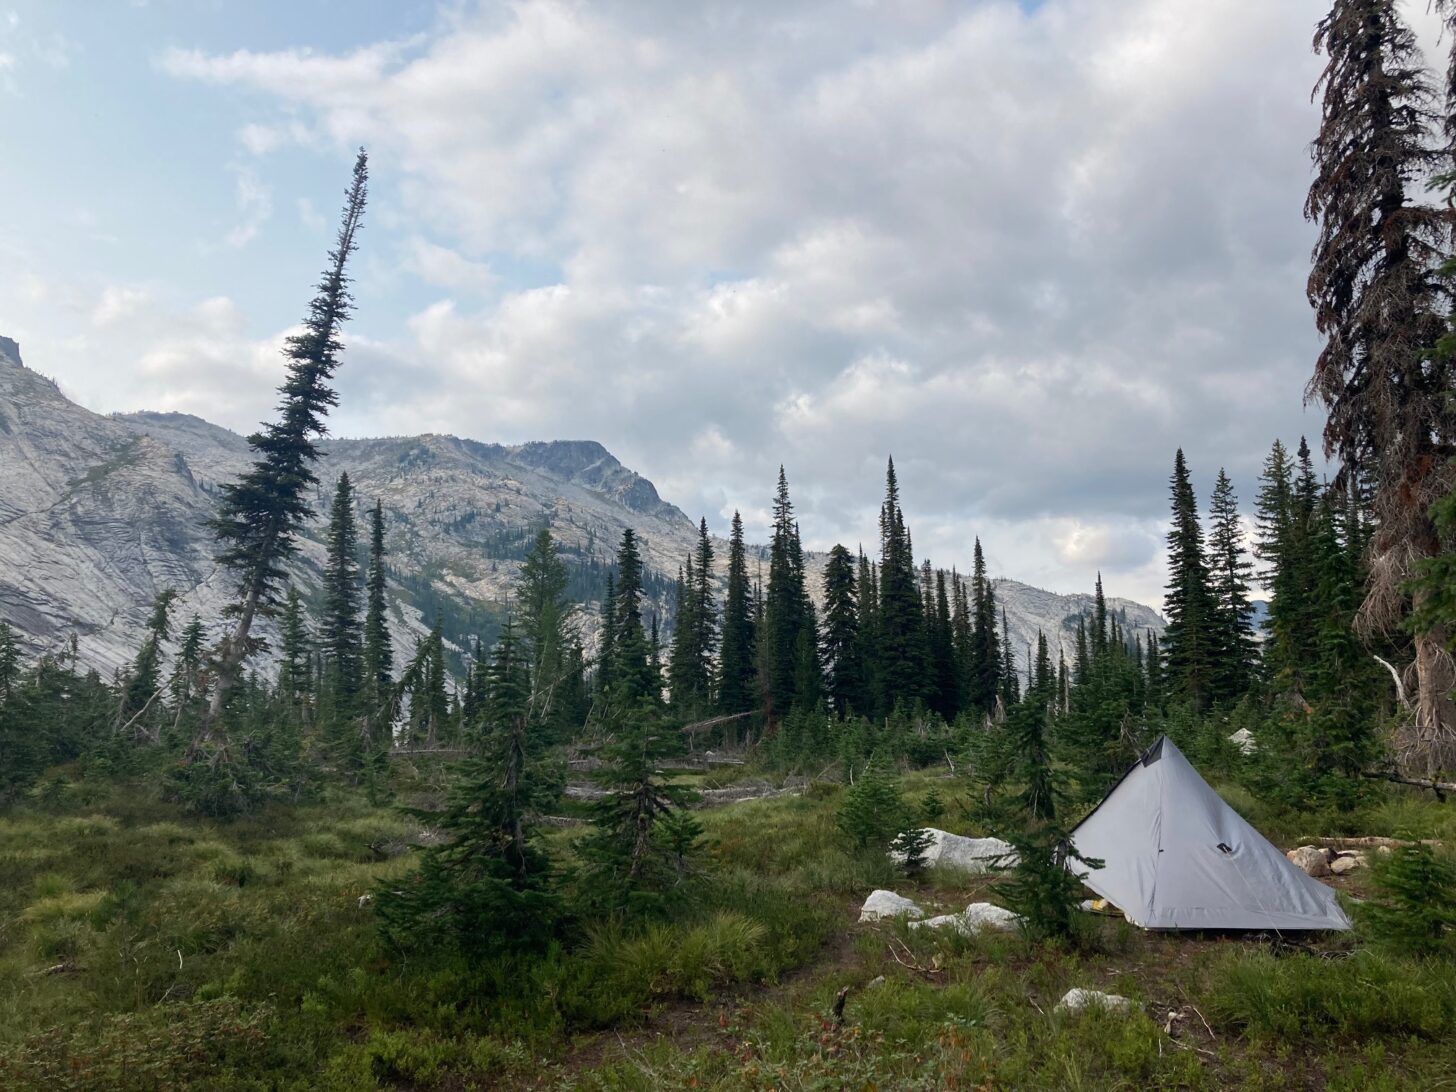 A tent in a subalpine forest in the foreground, with mountains in the background and clouds above.